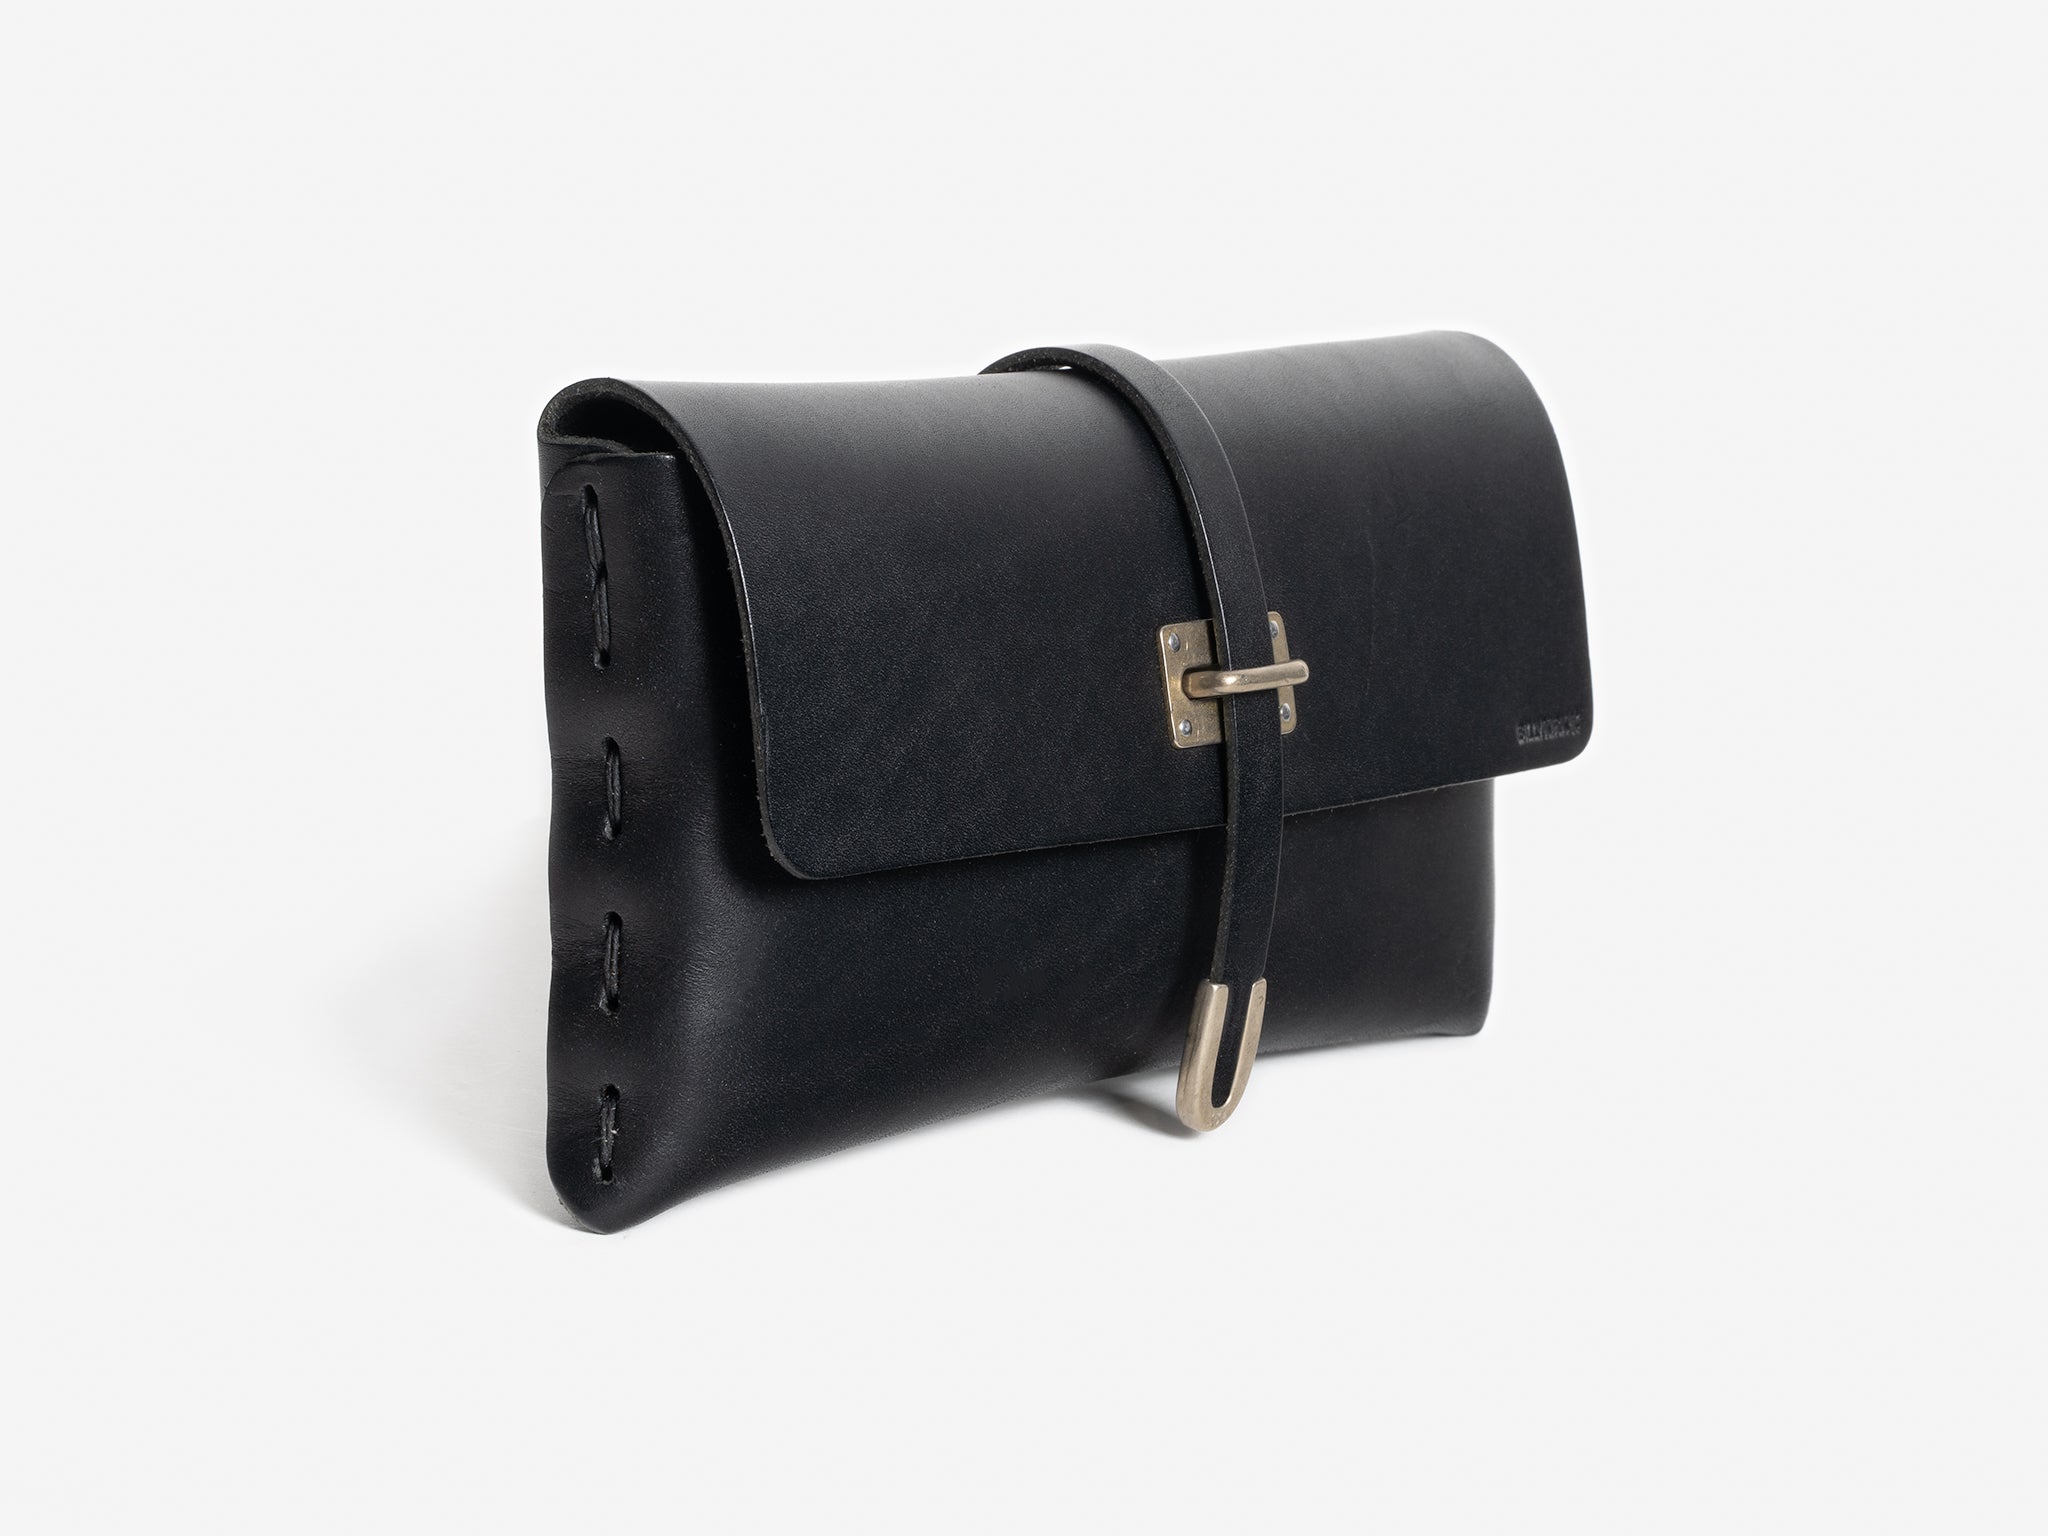 No. 125 Small Leather Clutch, Black Full-Grain Vegetable Tanned